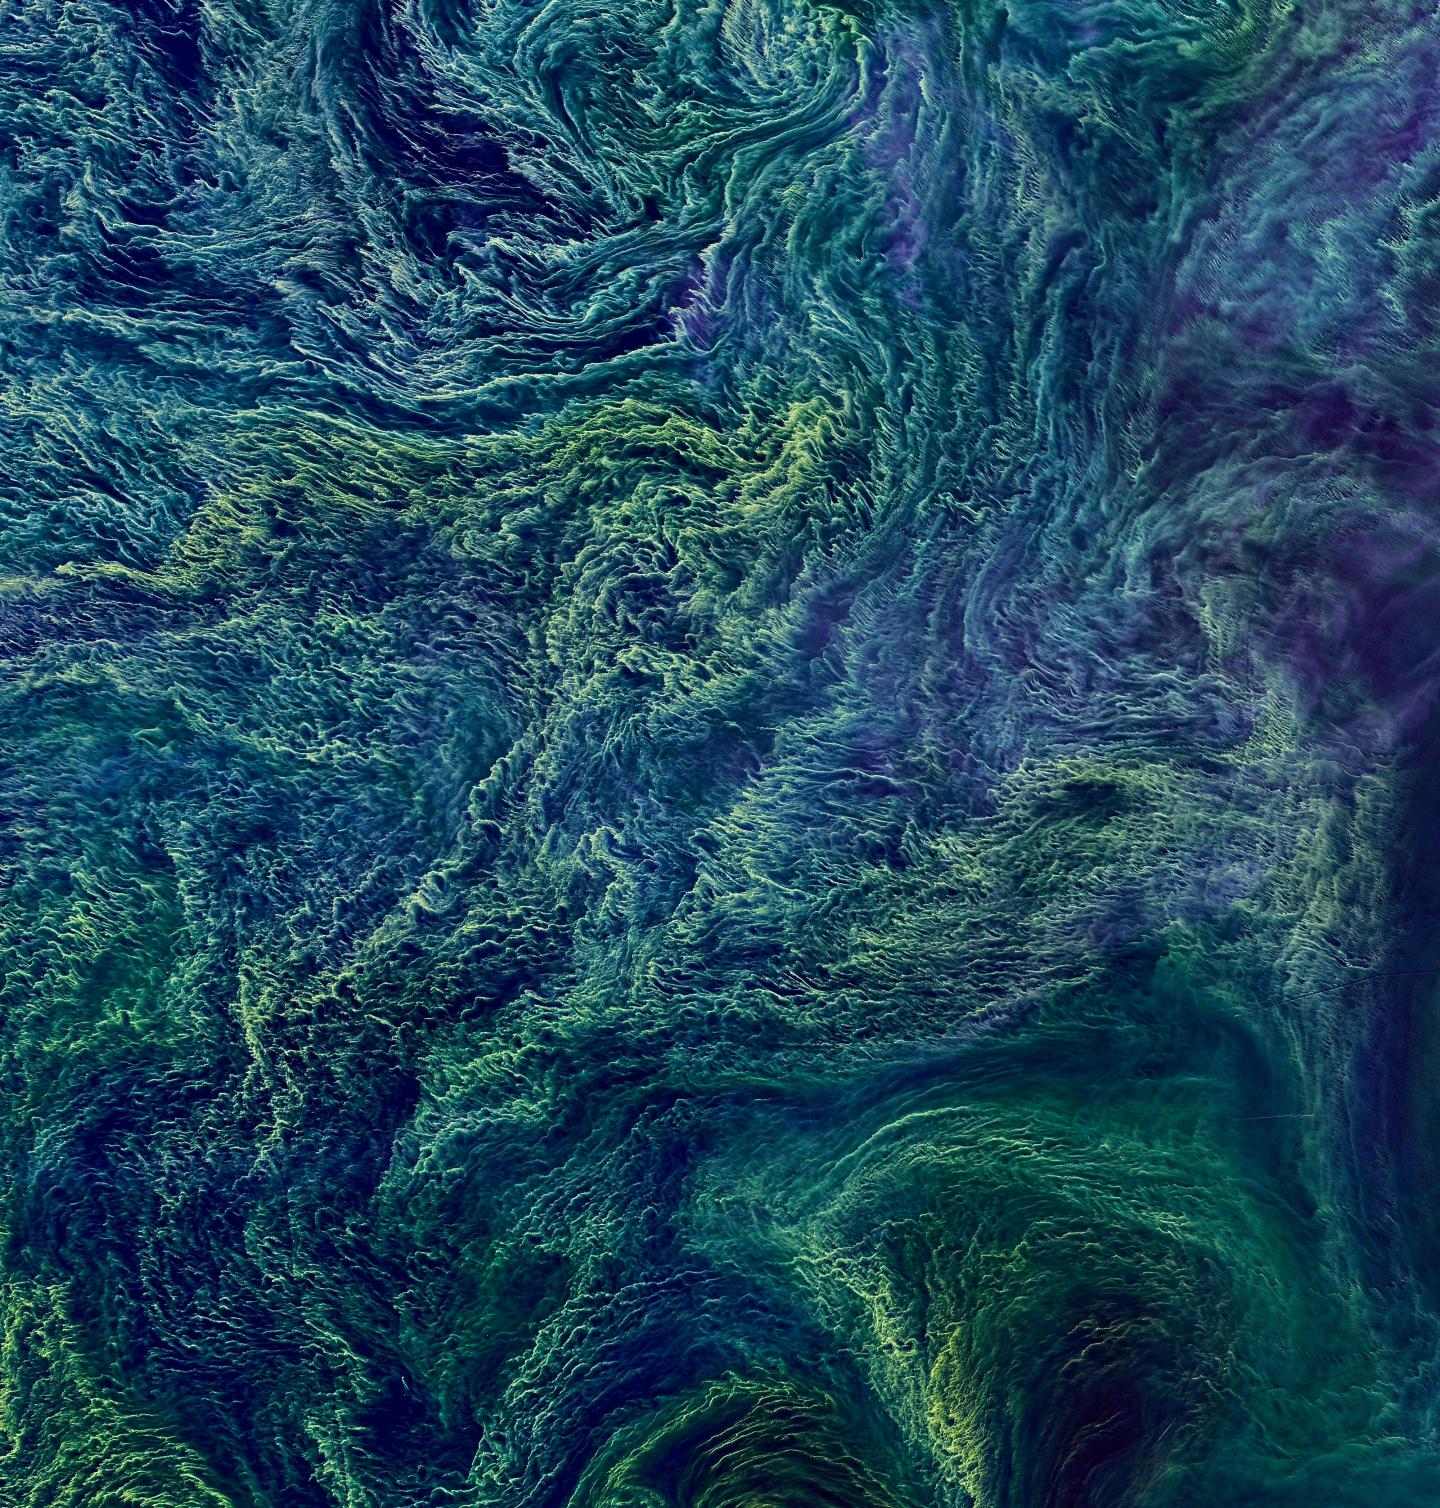 False-Color Image of a Large Bloom of Cyanobacteria